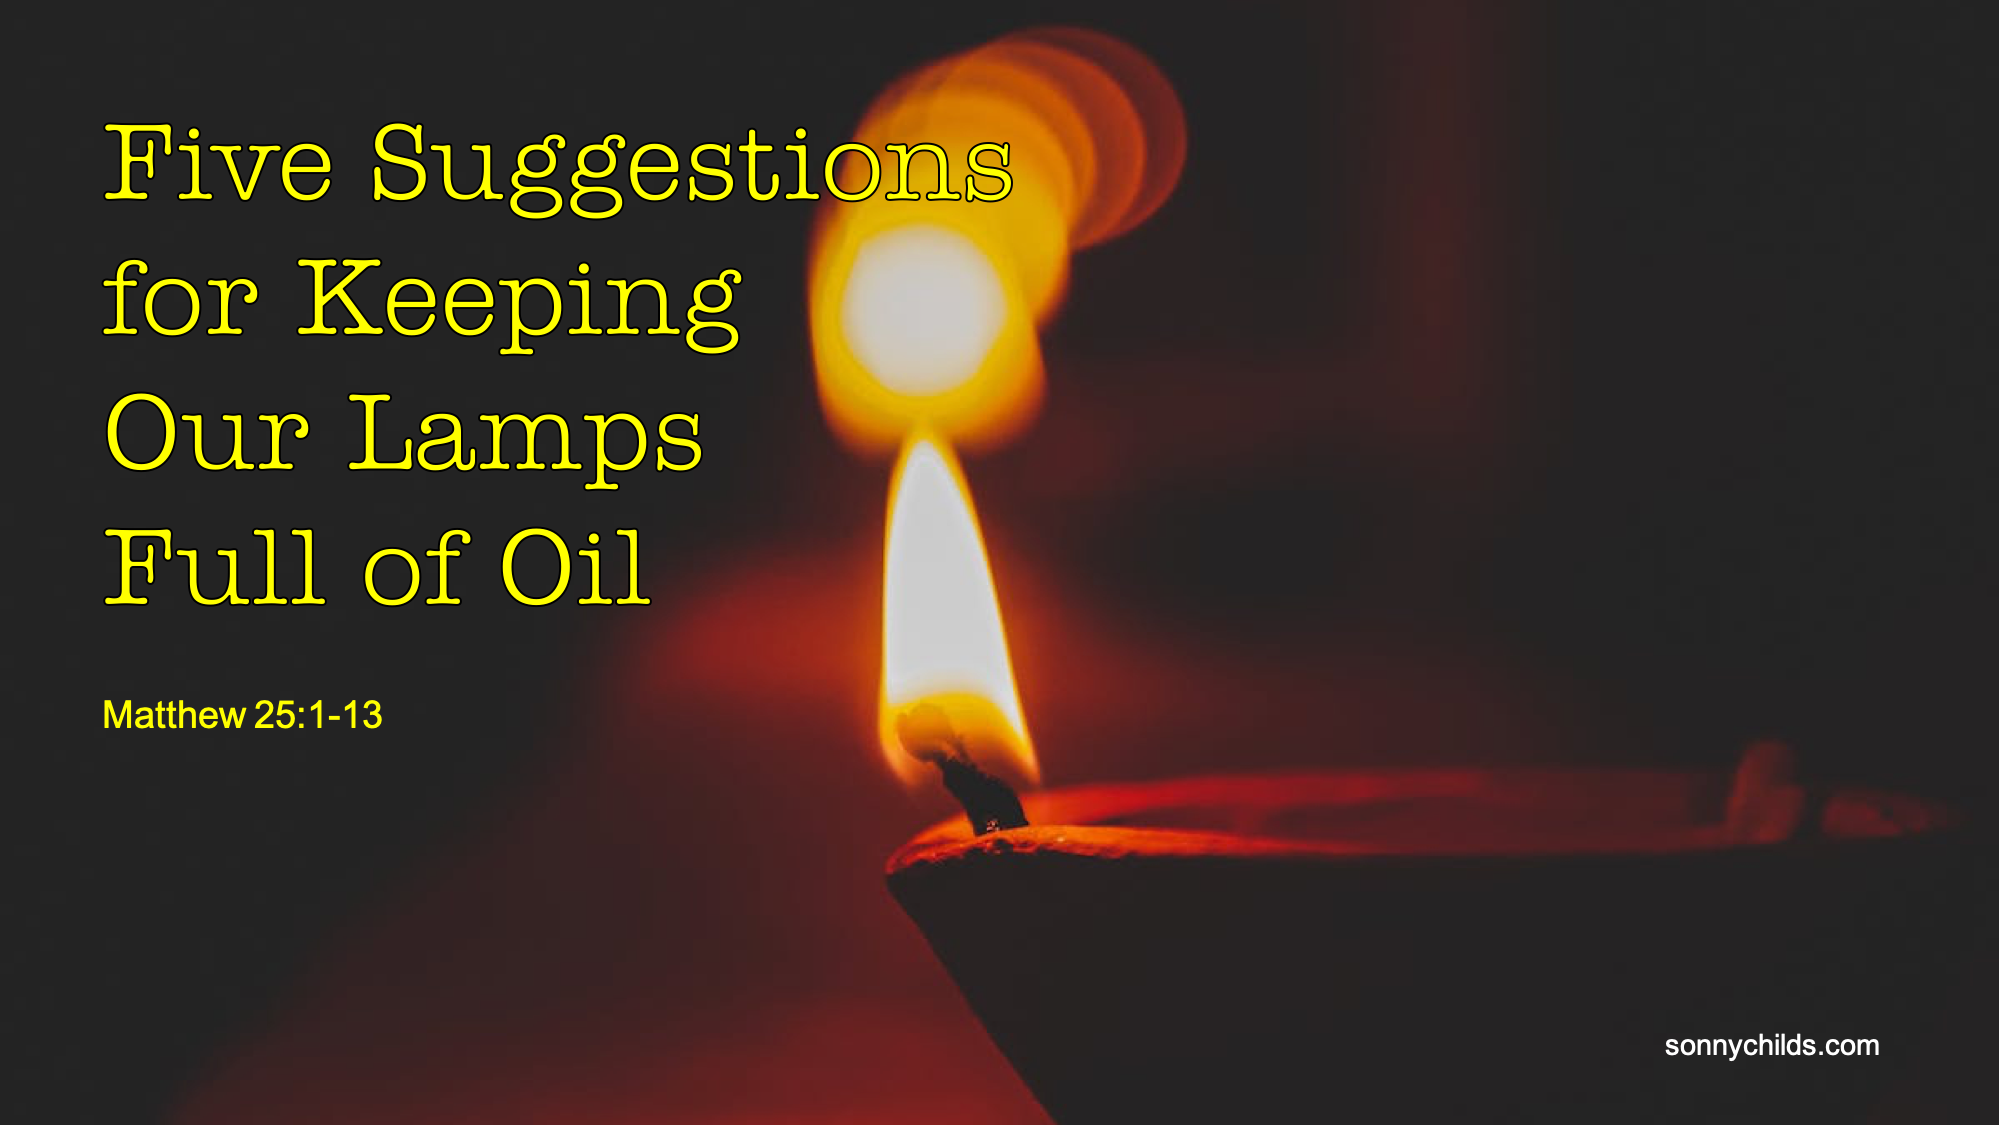 Five Suggestions for Keeping Our Lamps Full of Oil